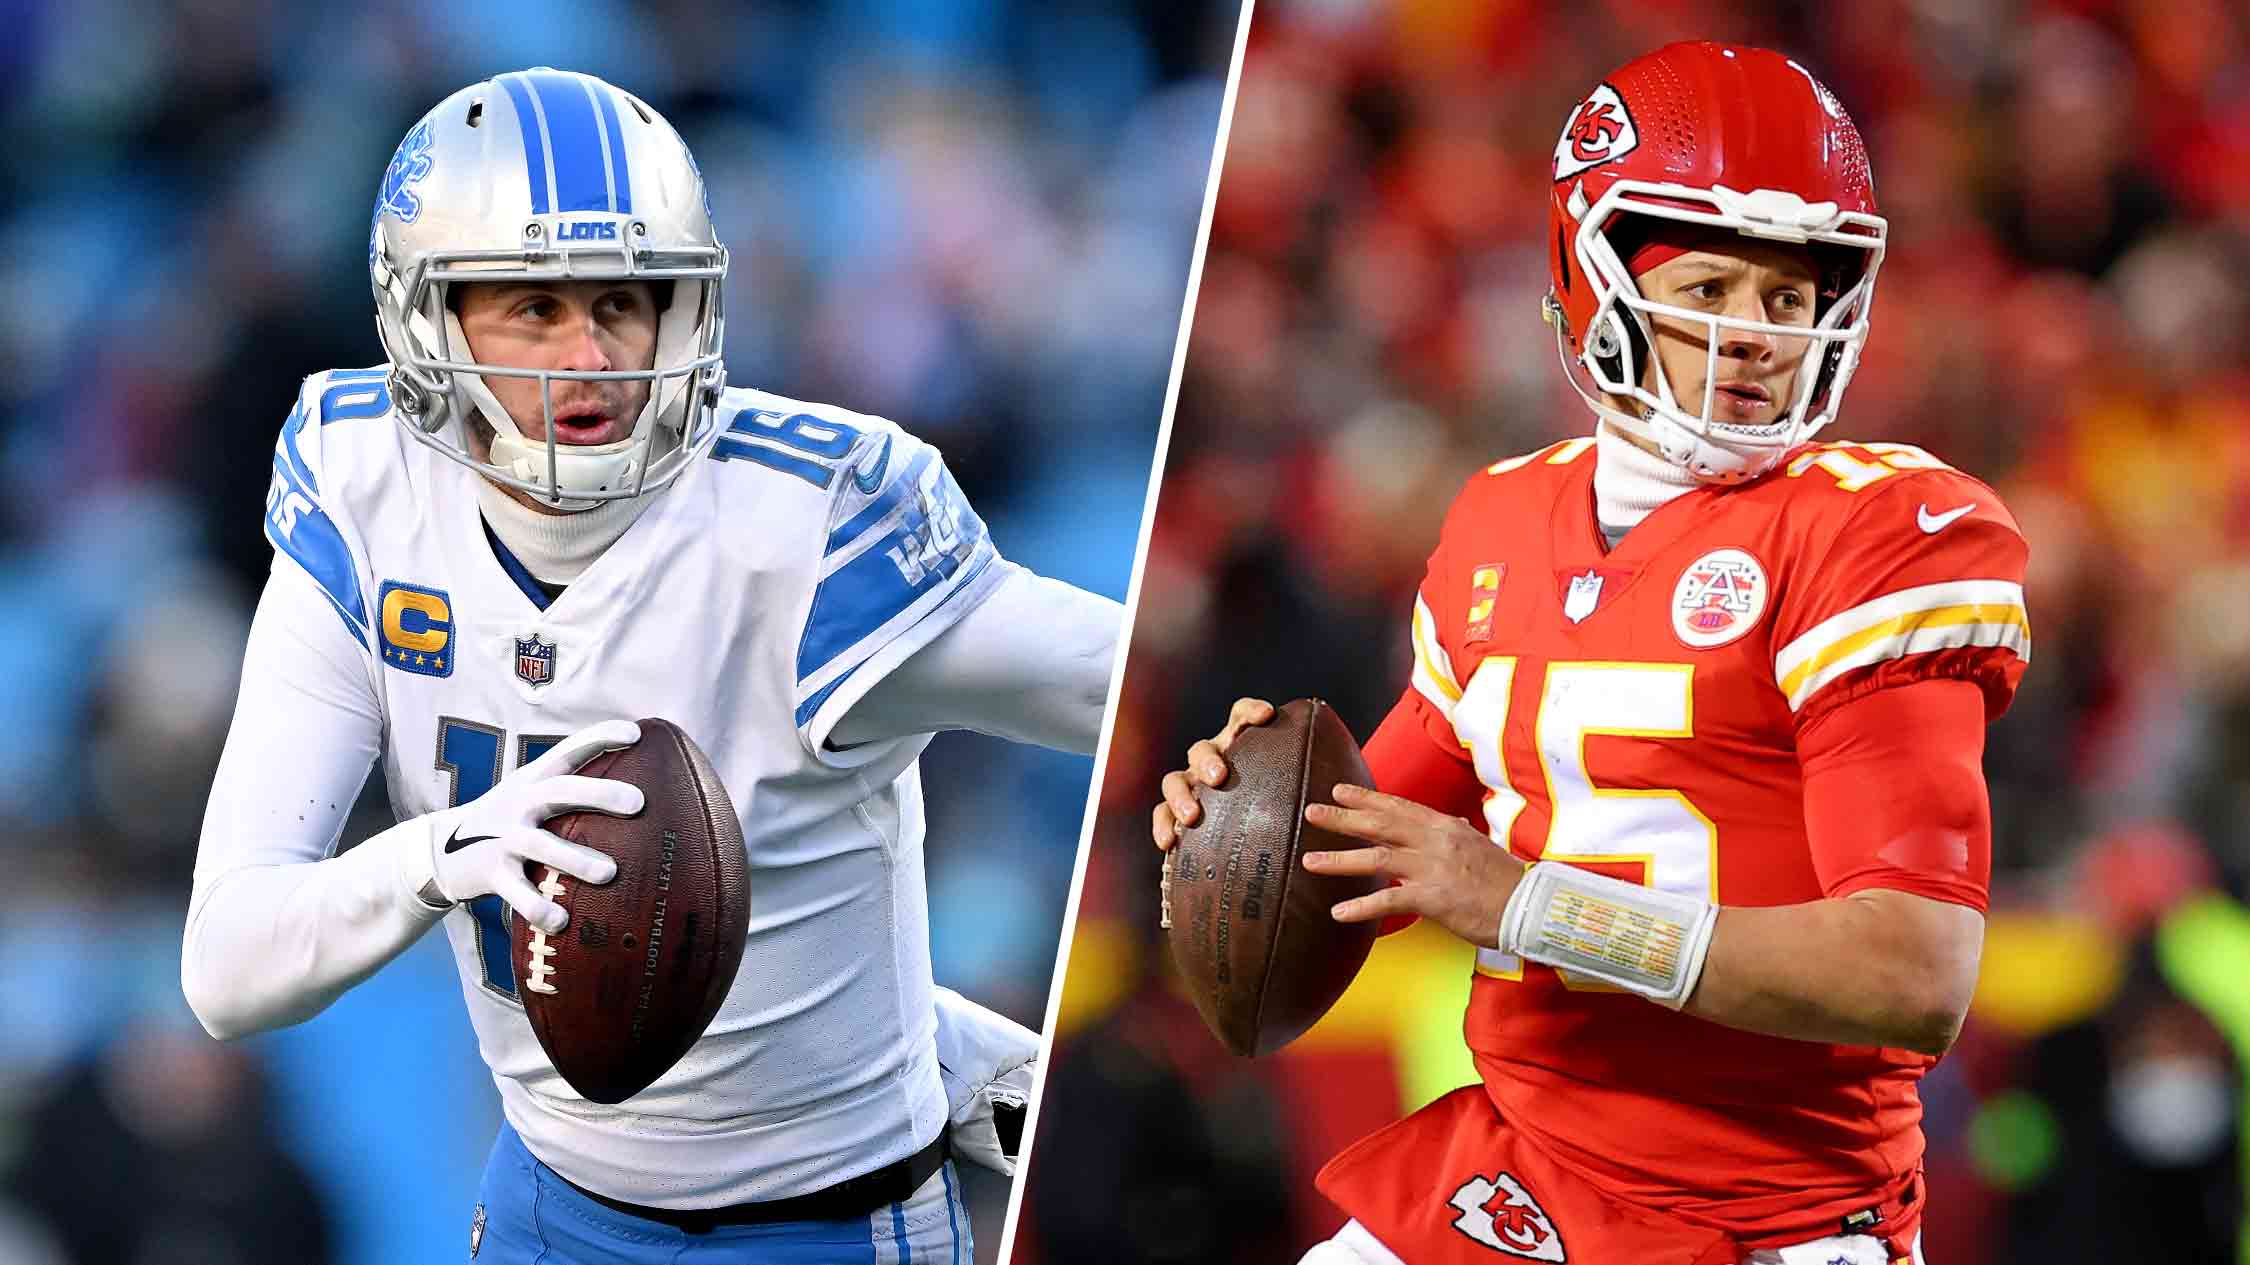 Lions vs. Chiefs live stream: How to watch NFL Kickoff Game on TV